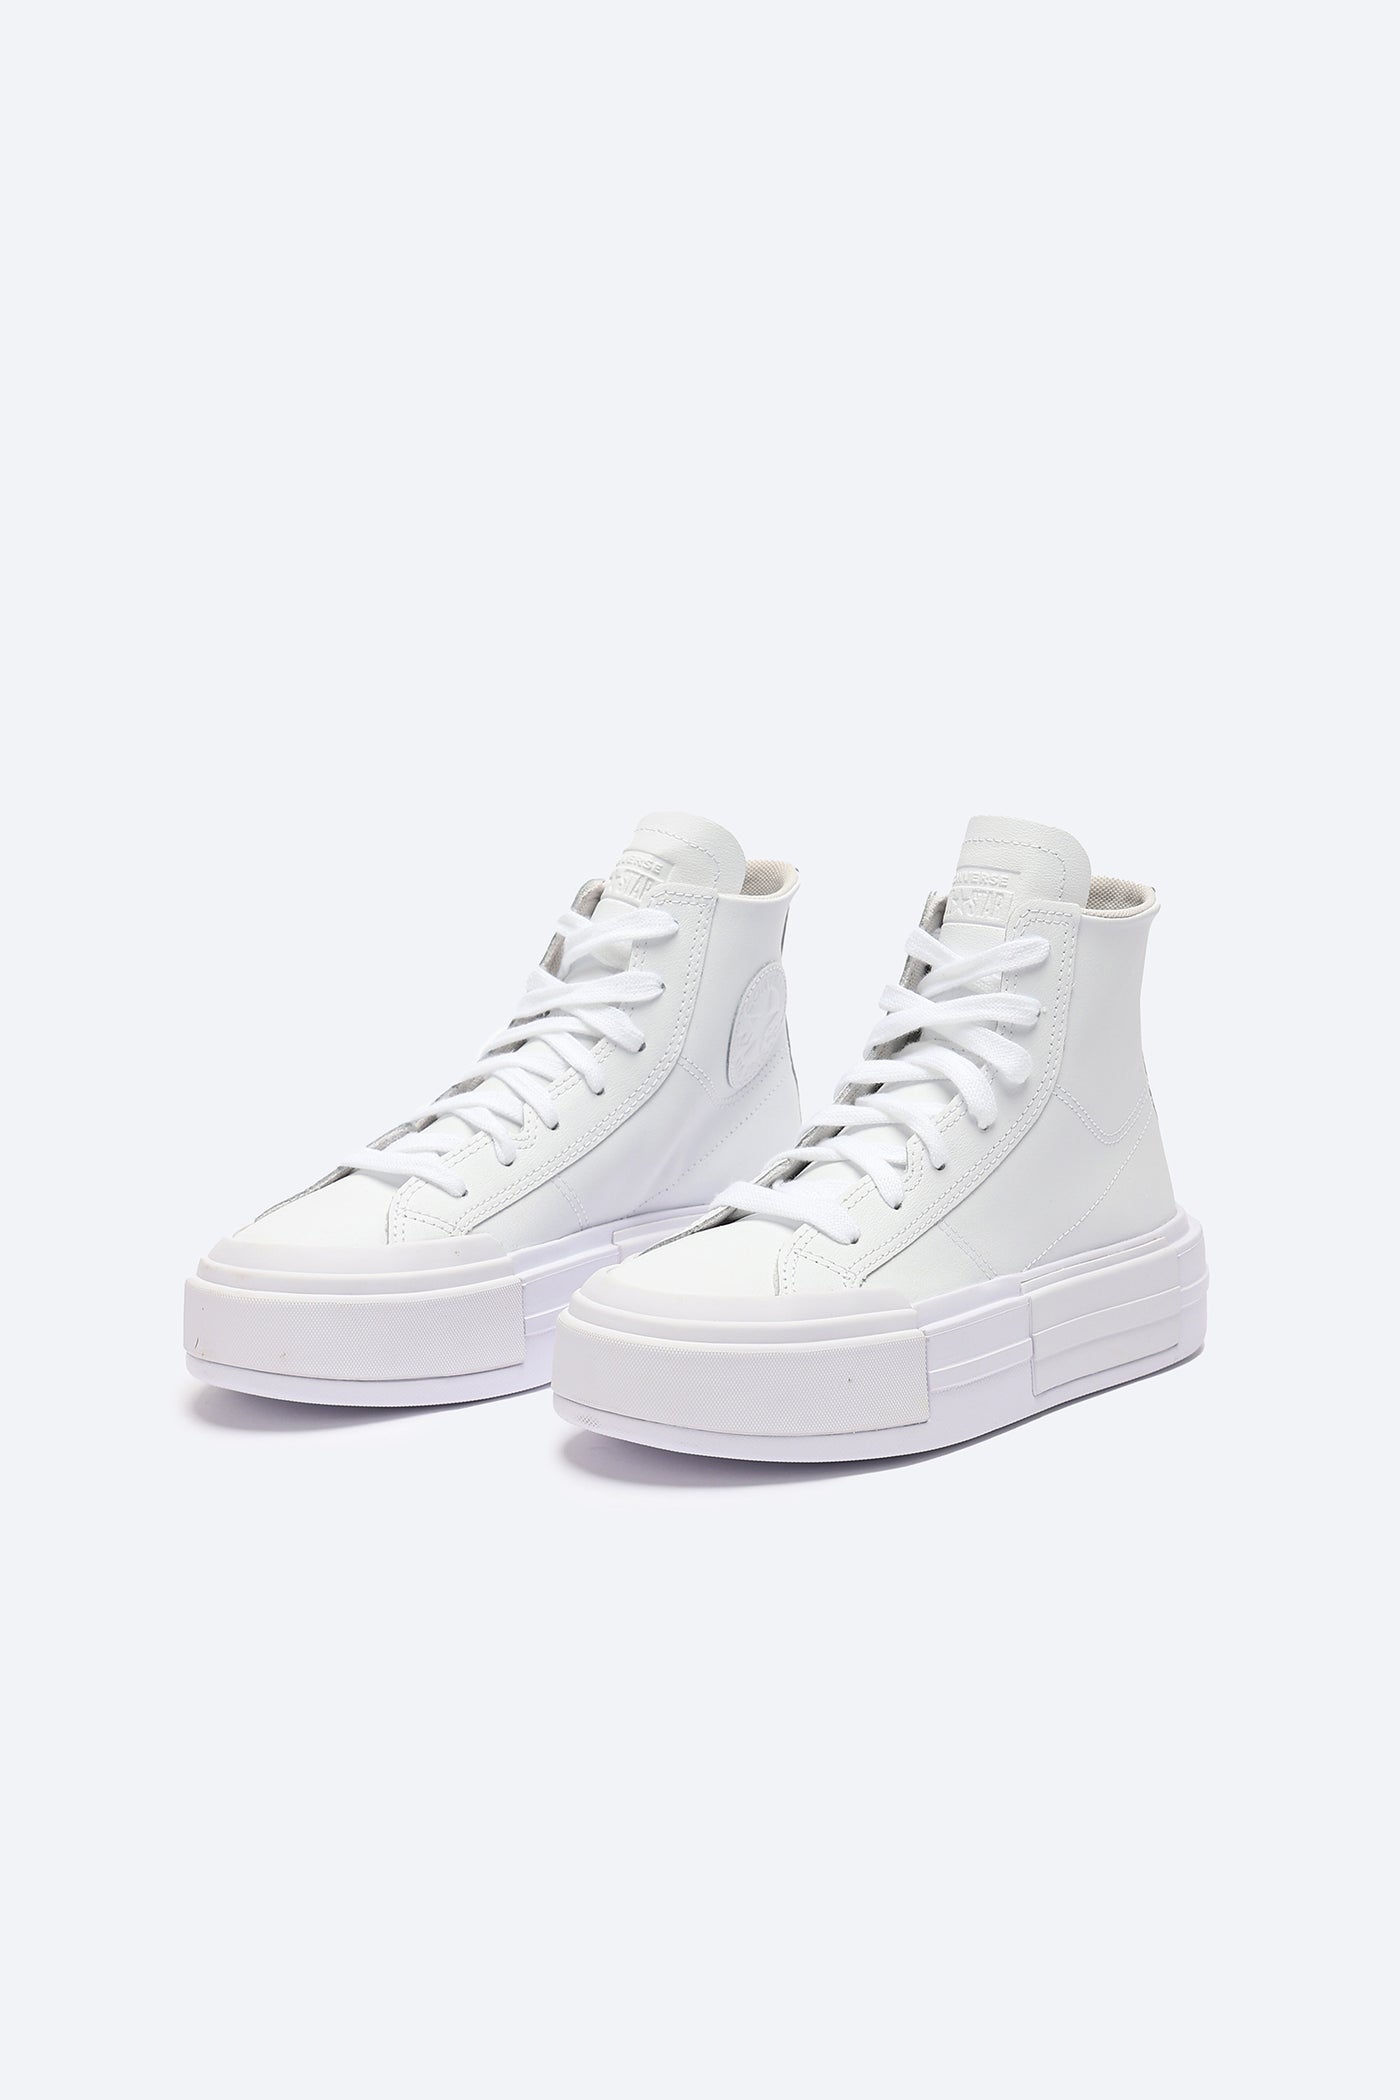 Sneakers - Chuck Taylor All Star - Cruise High